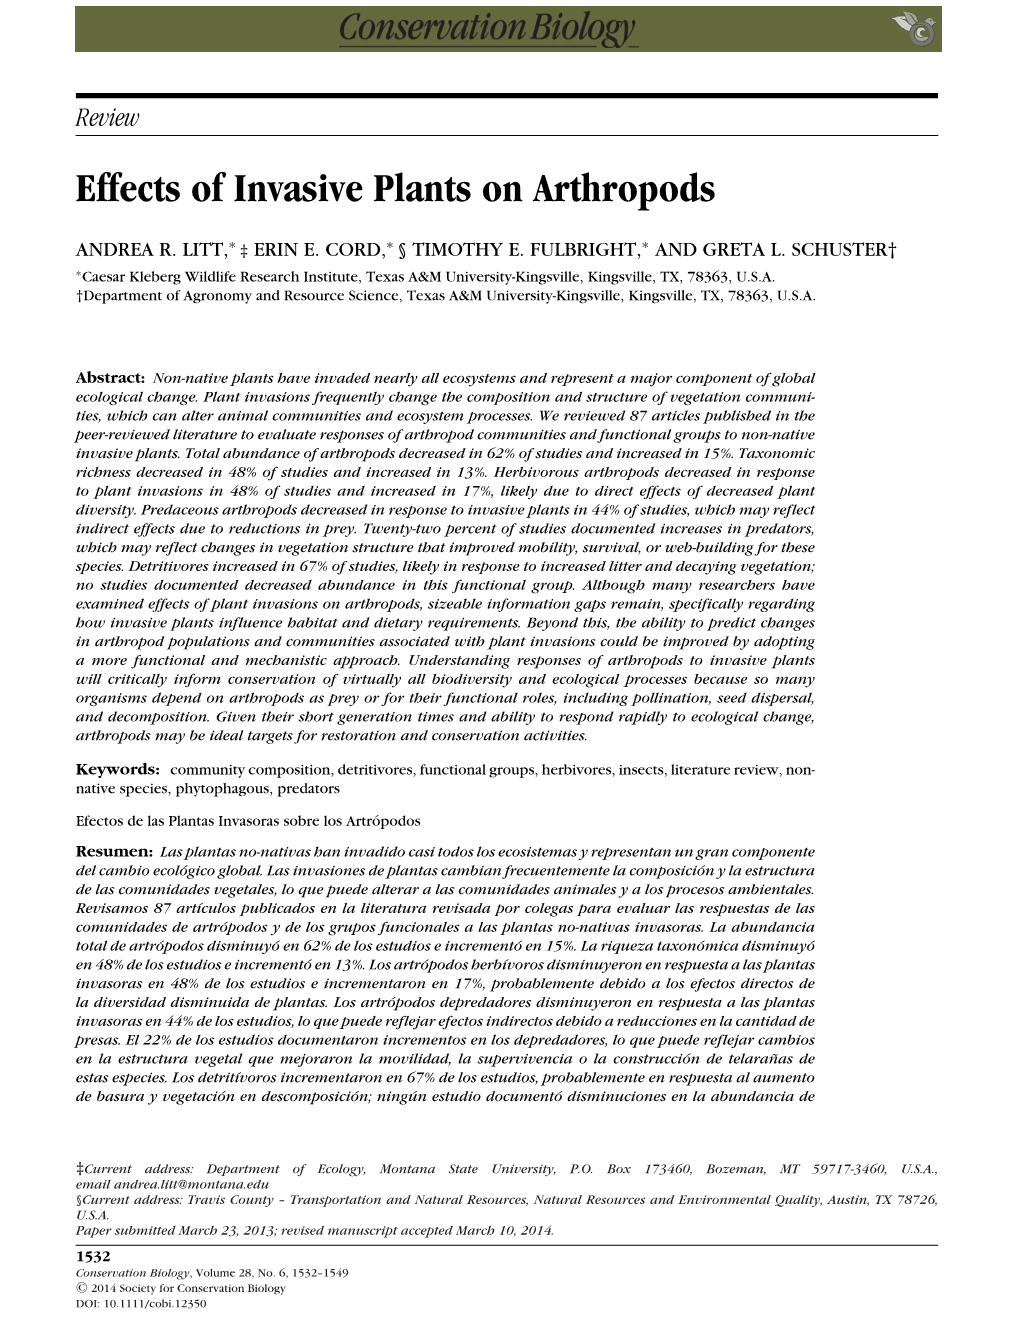 Review Effects of Invasive Plants on Arthropods